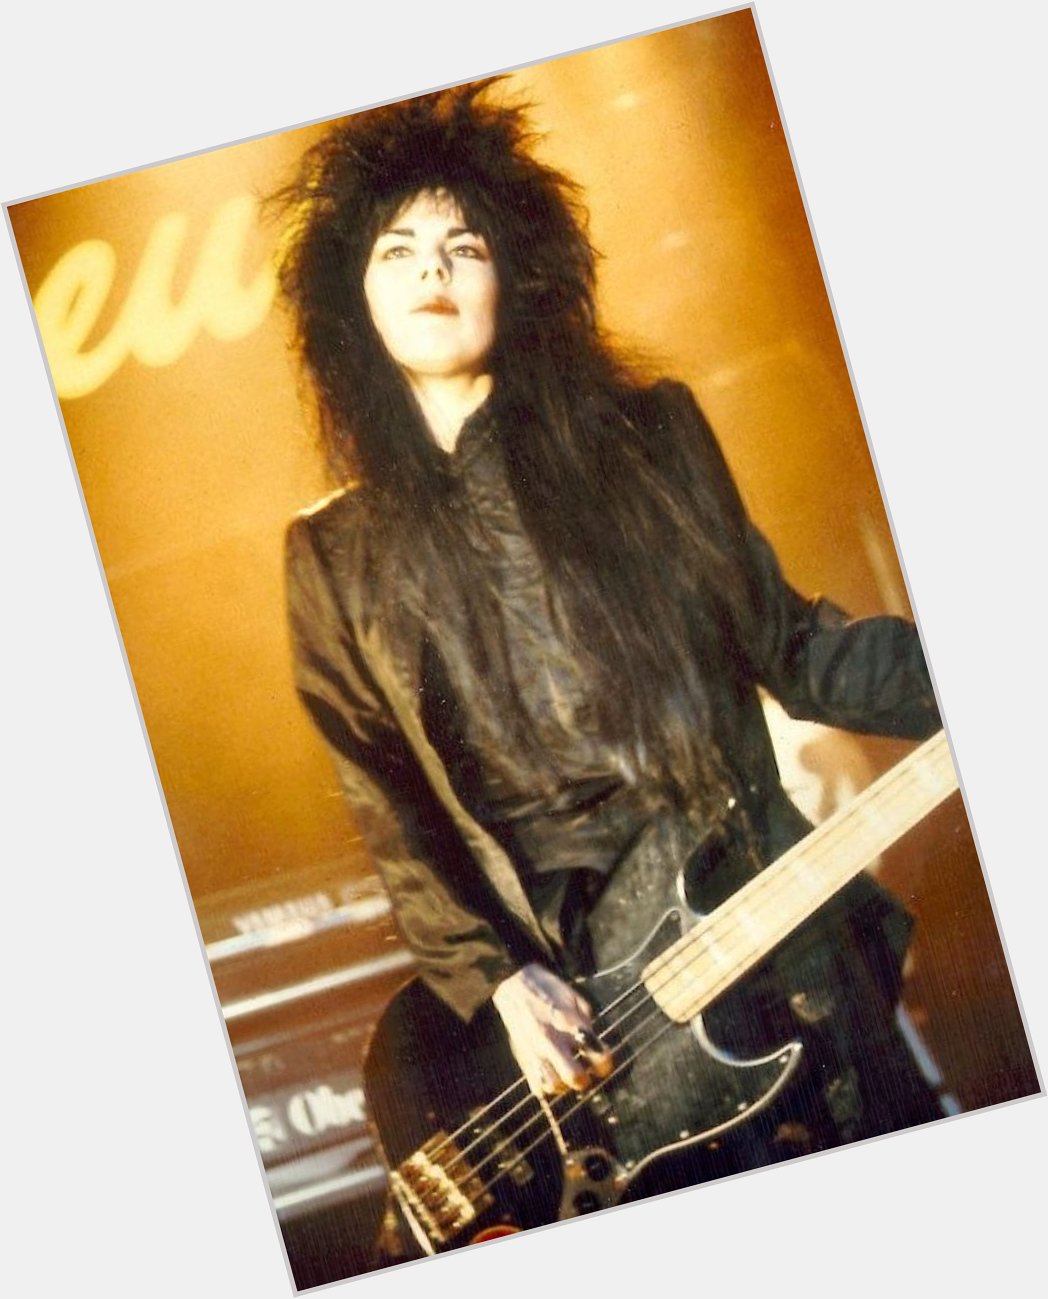 Happy Birthday Patricia Morrison - The Sisters Of Mercy, The Damned. 